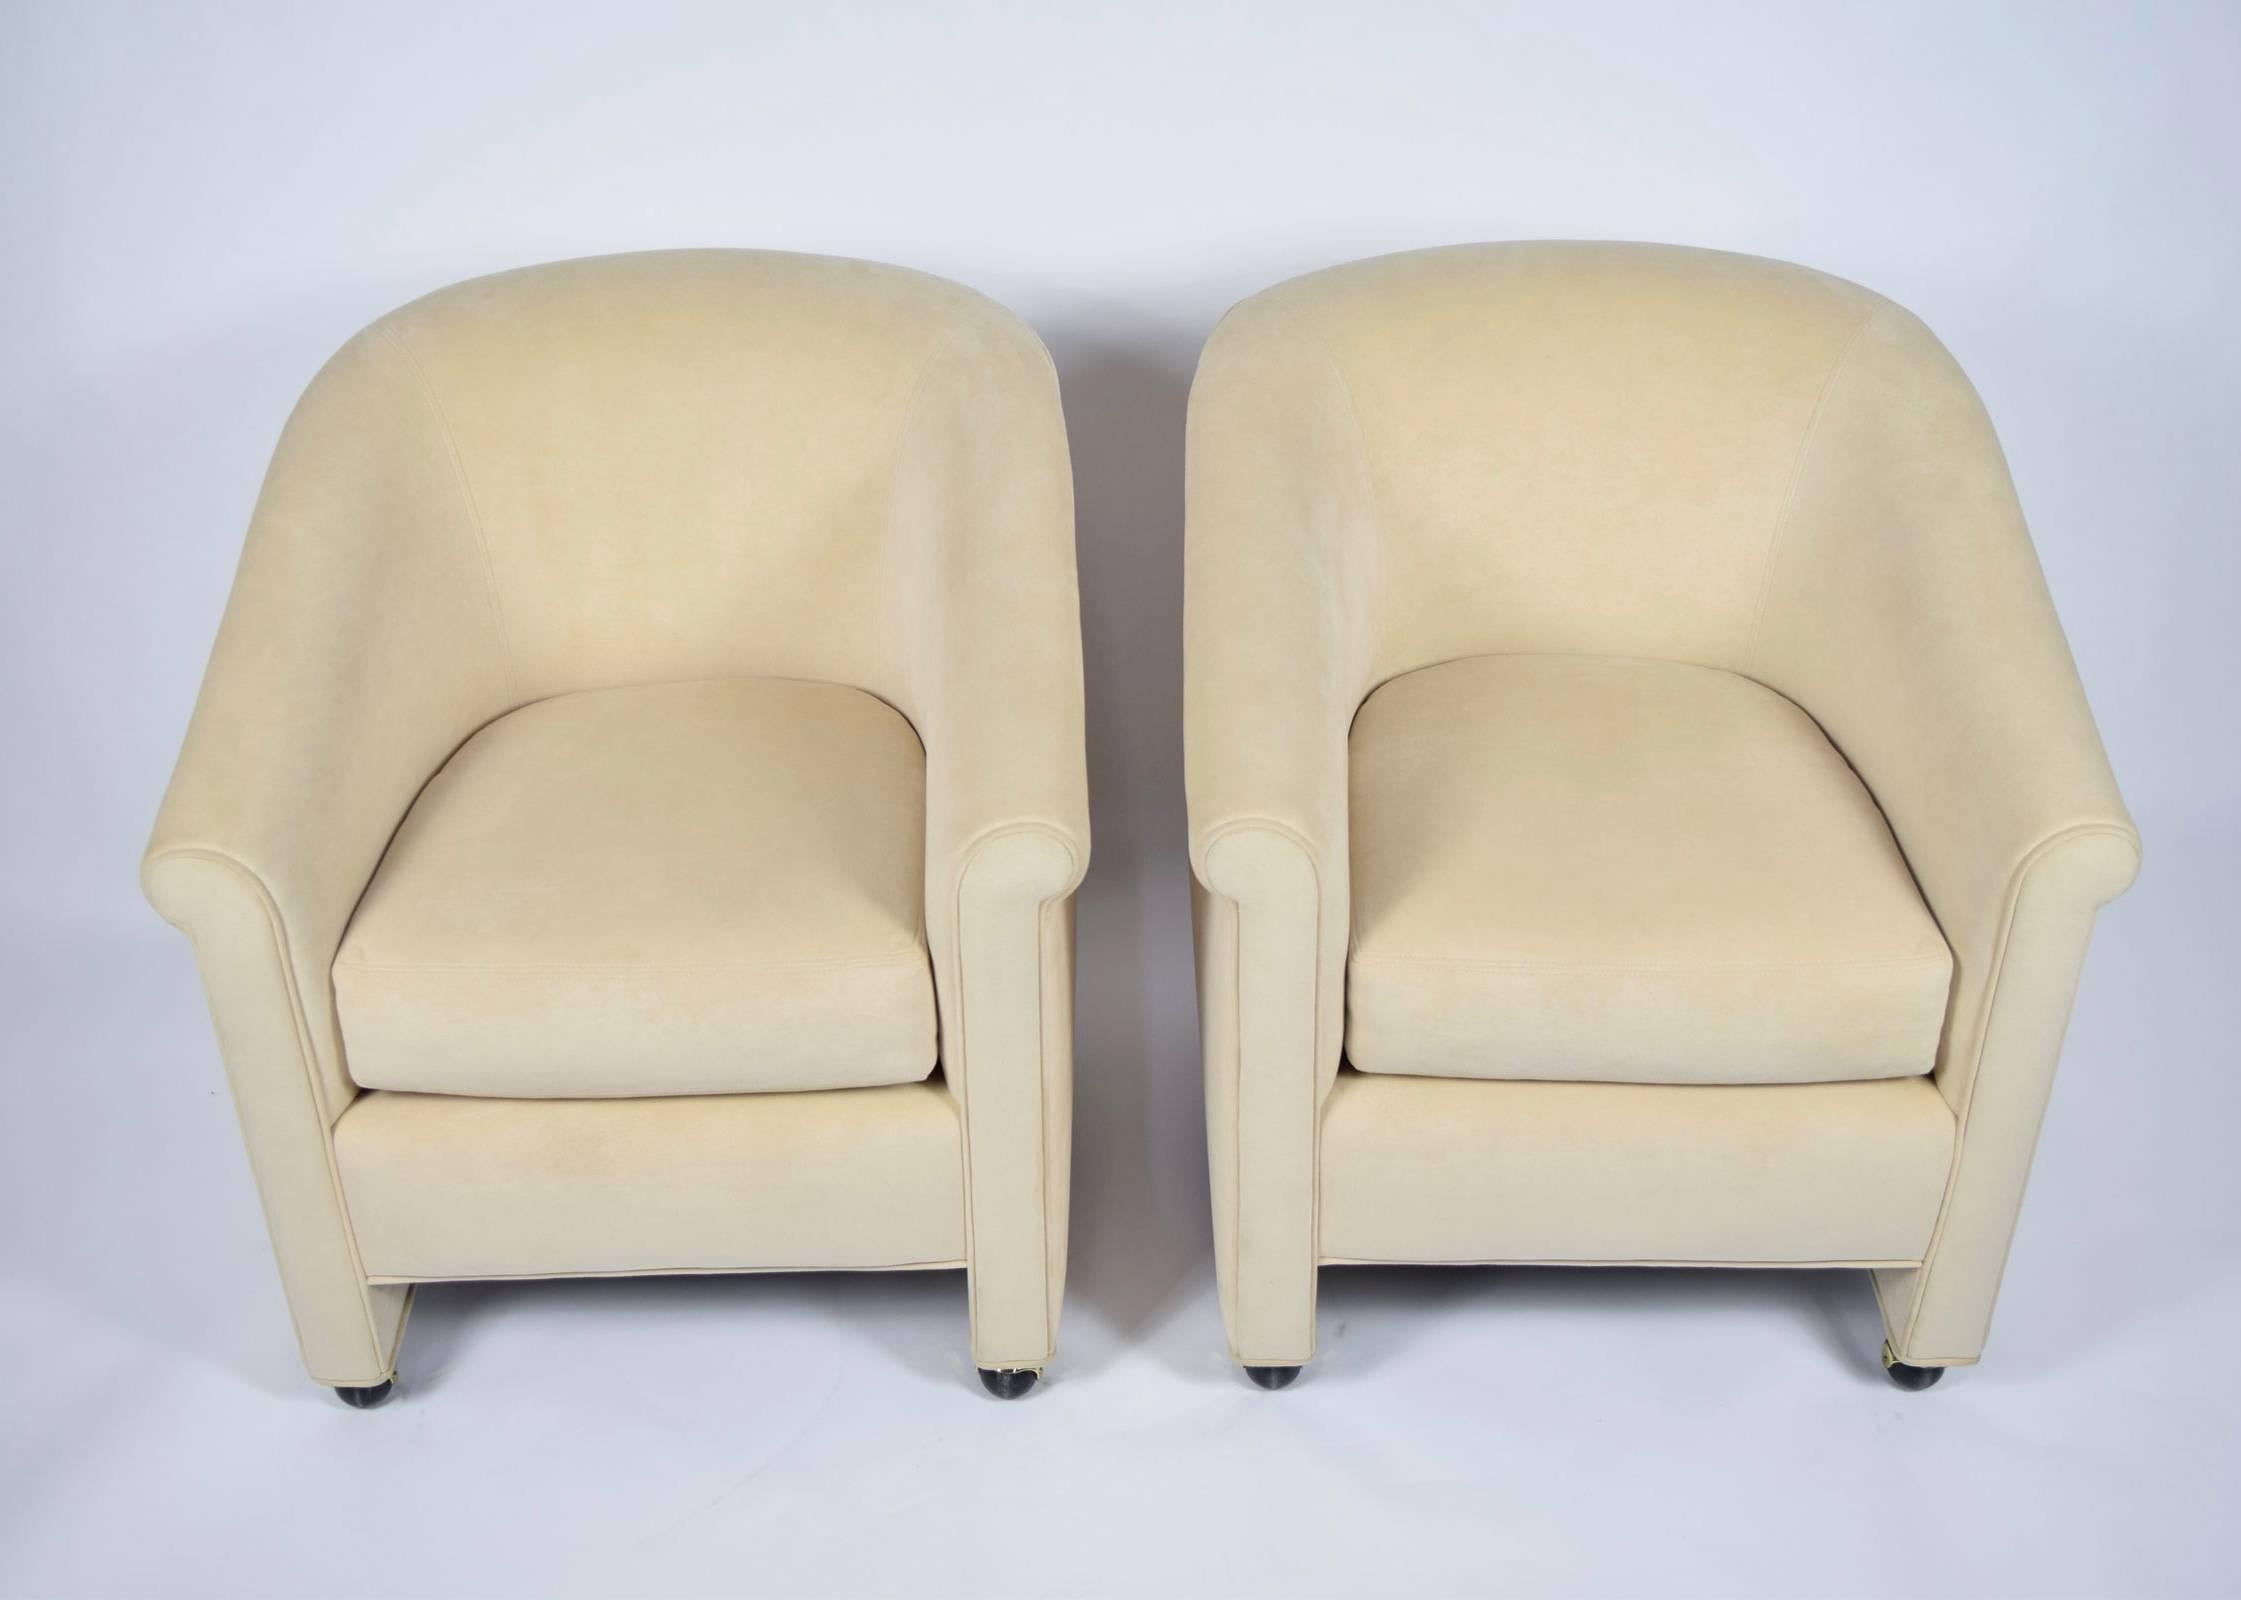 A really nice pair of club chairs by A. Rudin. Fabric appears to be a suede and is in really nice condition so if color works, no reupholstery is necessary. Chairs are on casters.